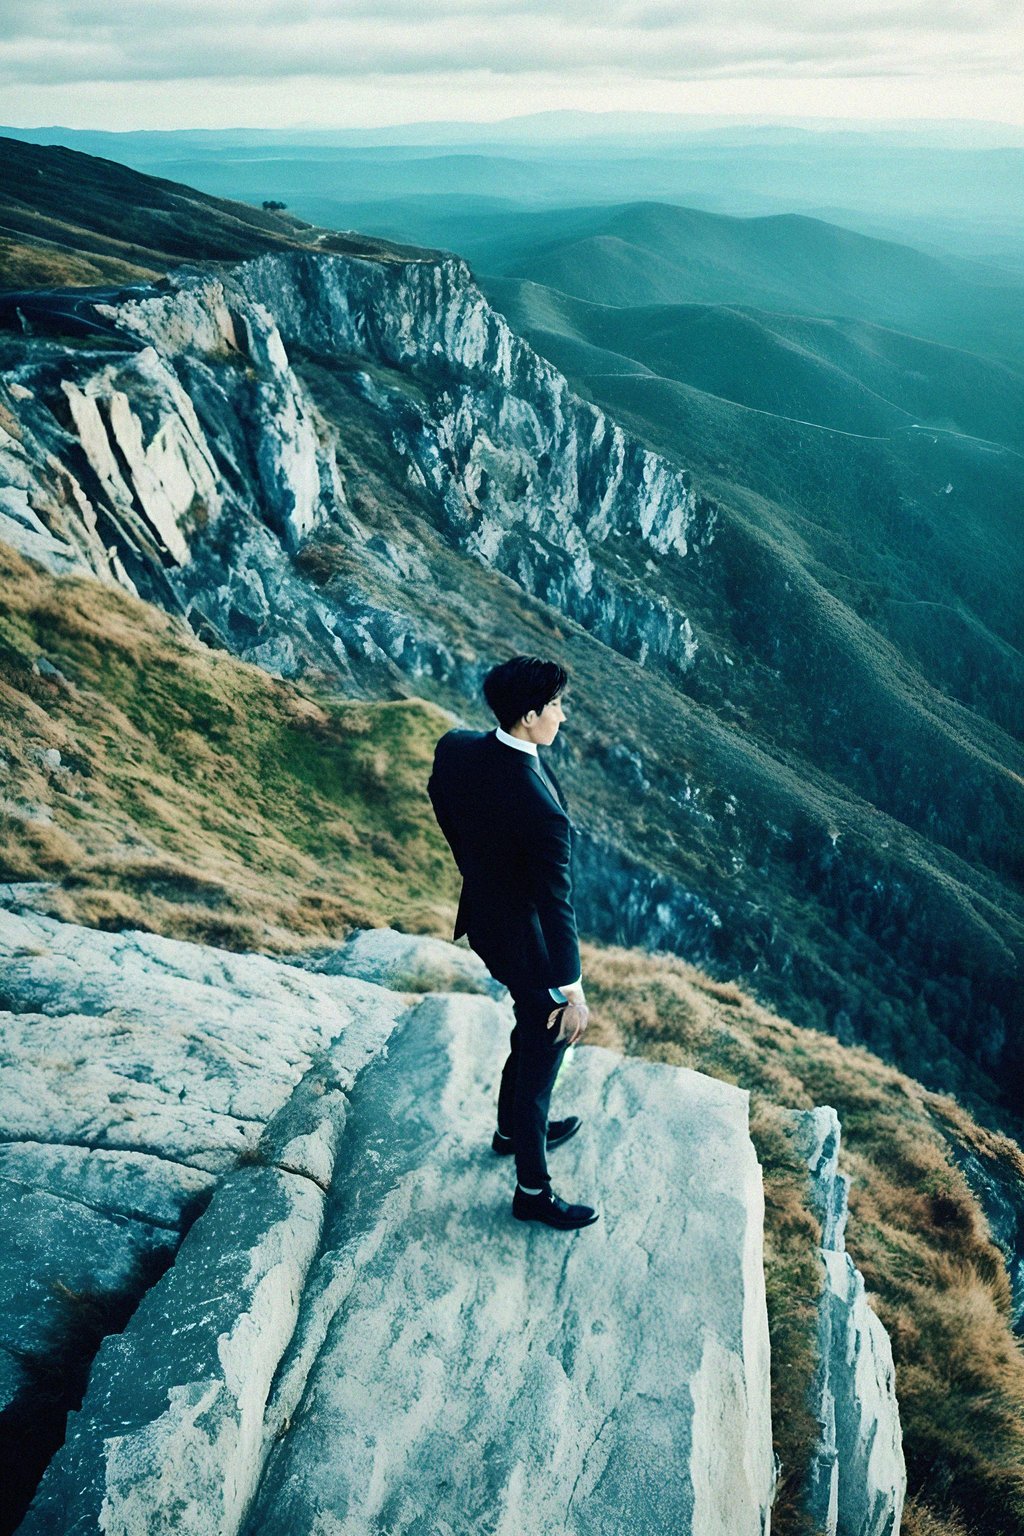 man standing on a cliff edge, with a vast and dramatic landscape stretching out before them, evoking a sense of freedom and exploration